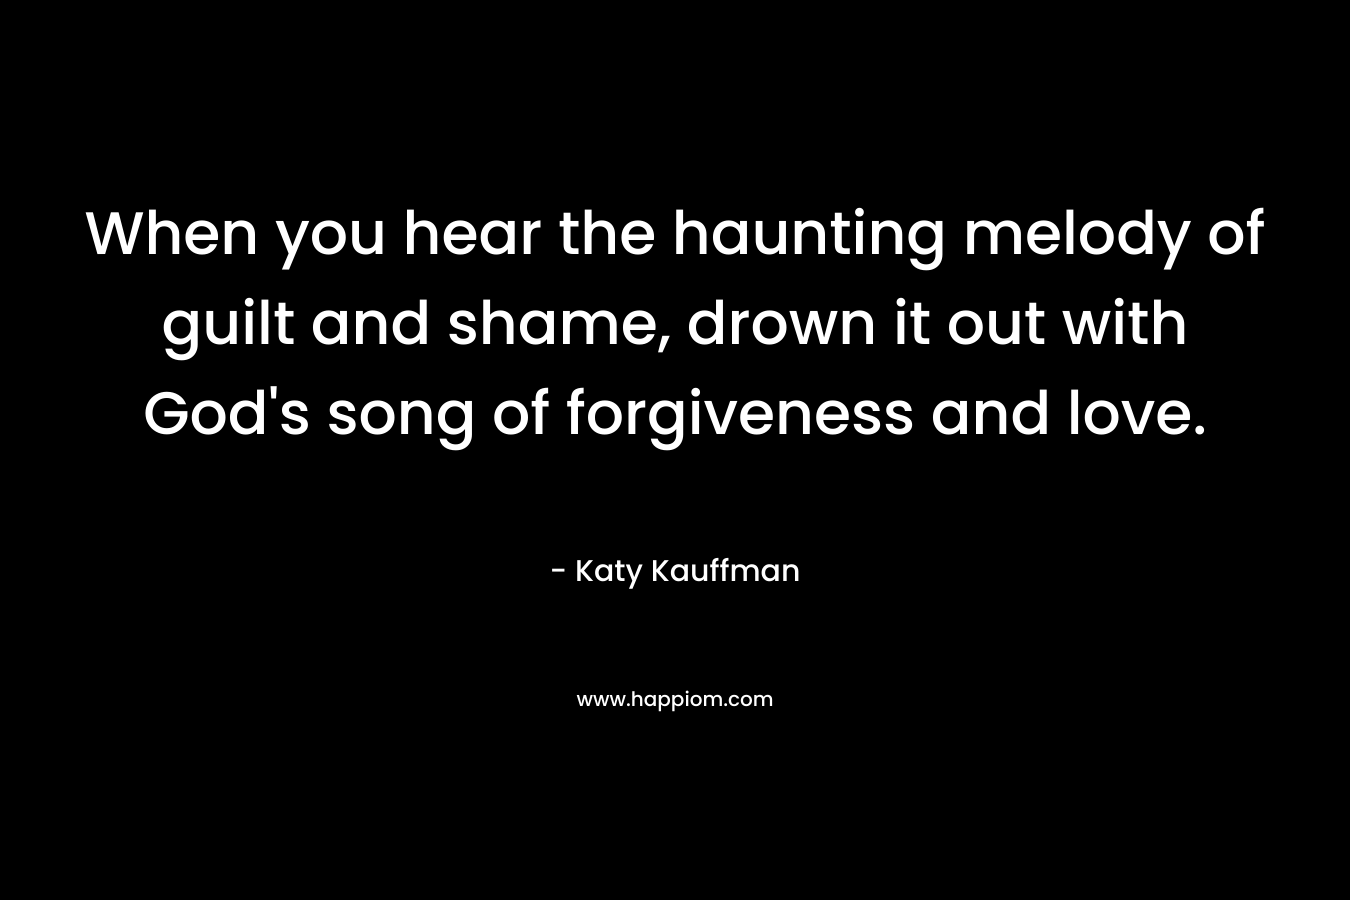 When you hear the haunting melody of guilt and shame, drown it out with God's song of forgiveness and love.